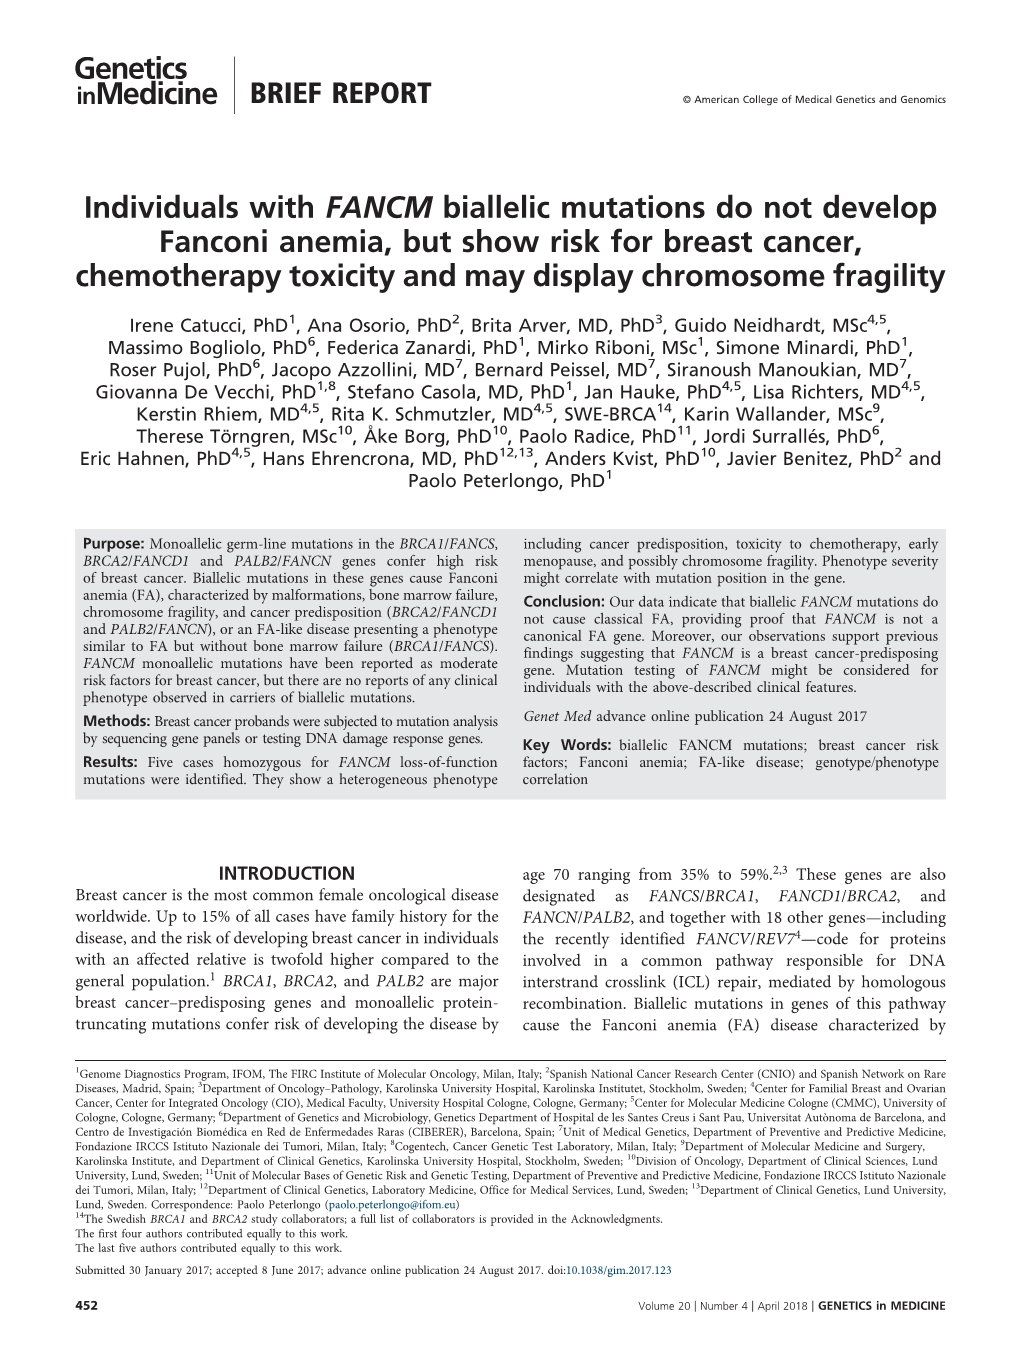 Individuals with FANCM Biallelic Mutations Do Not Develop Fanconi Anemia, but Show Risk for Breast Cancer, Chemotherapy Toxicity and May Display Chromosome Fragility